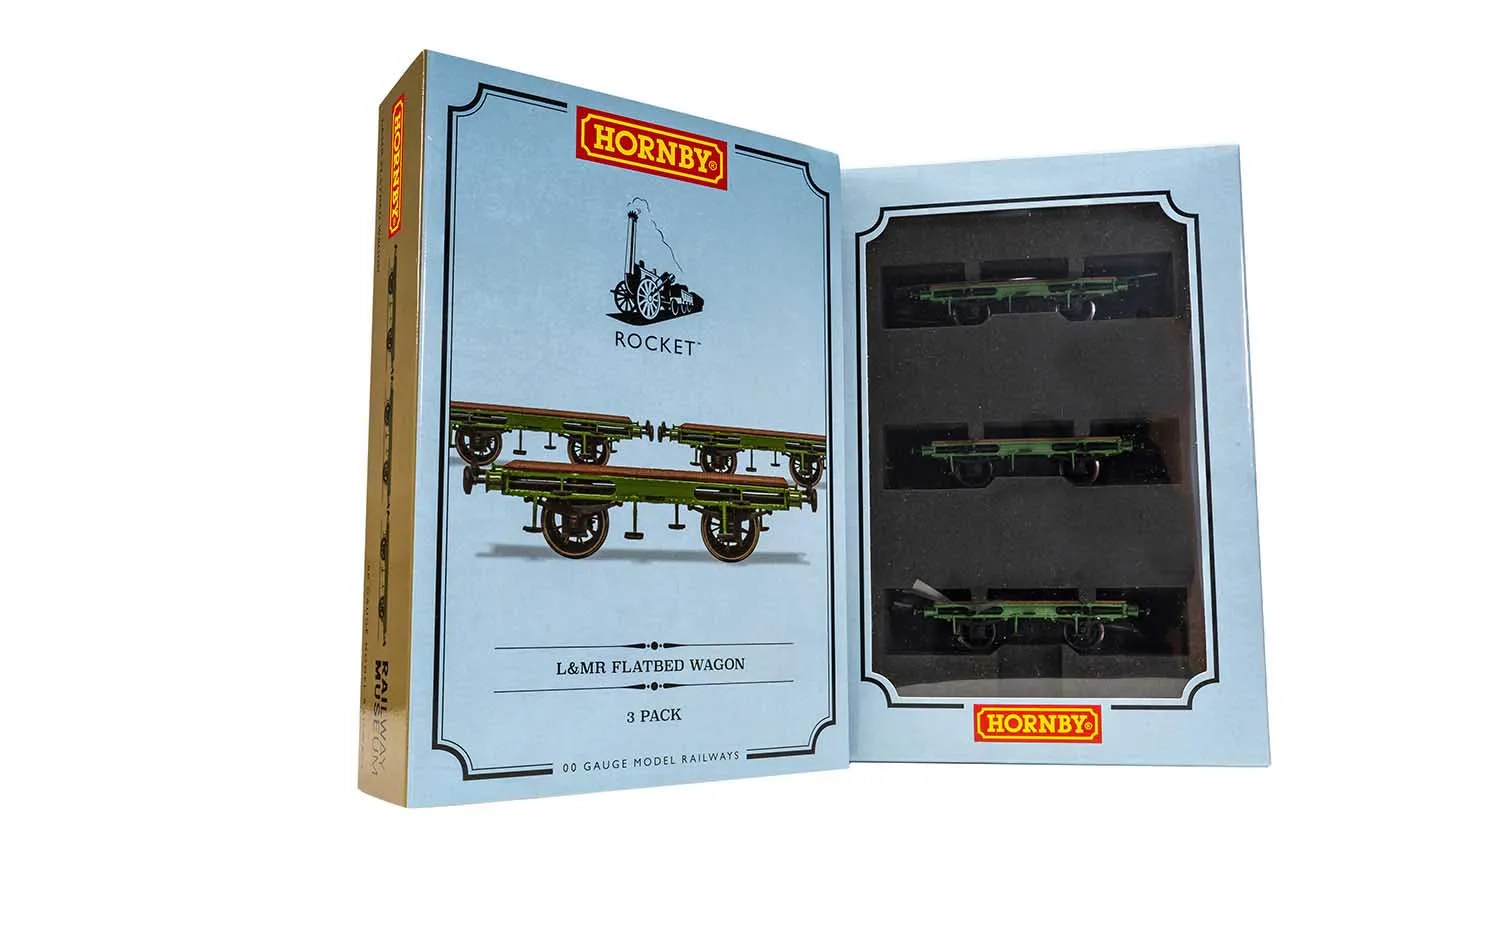 Flat Bed Wagon Pack containing 3 x Flat Bed wagons (Stephenson's Rocket)